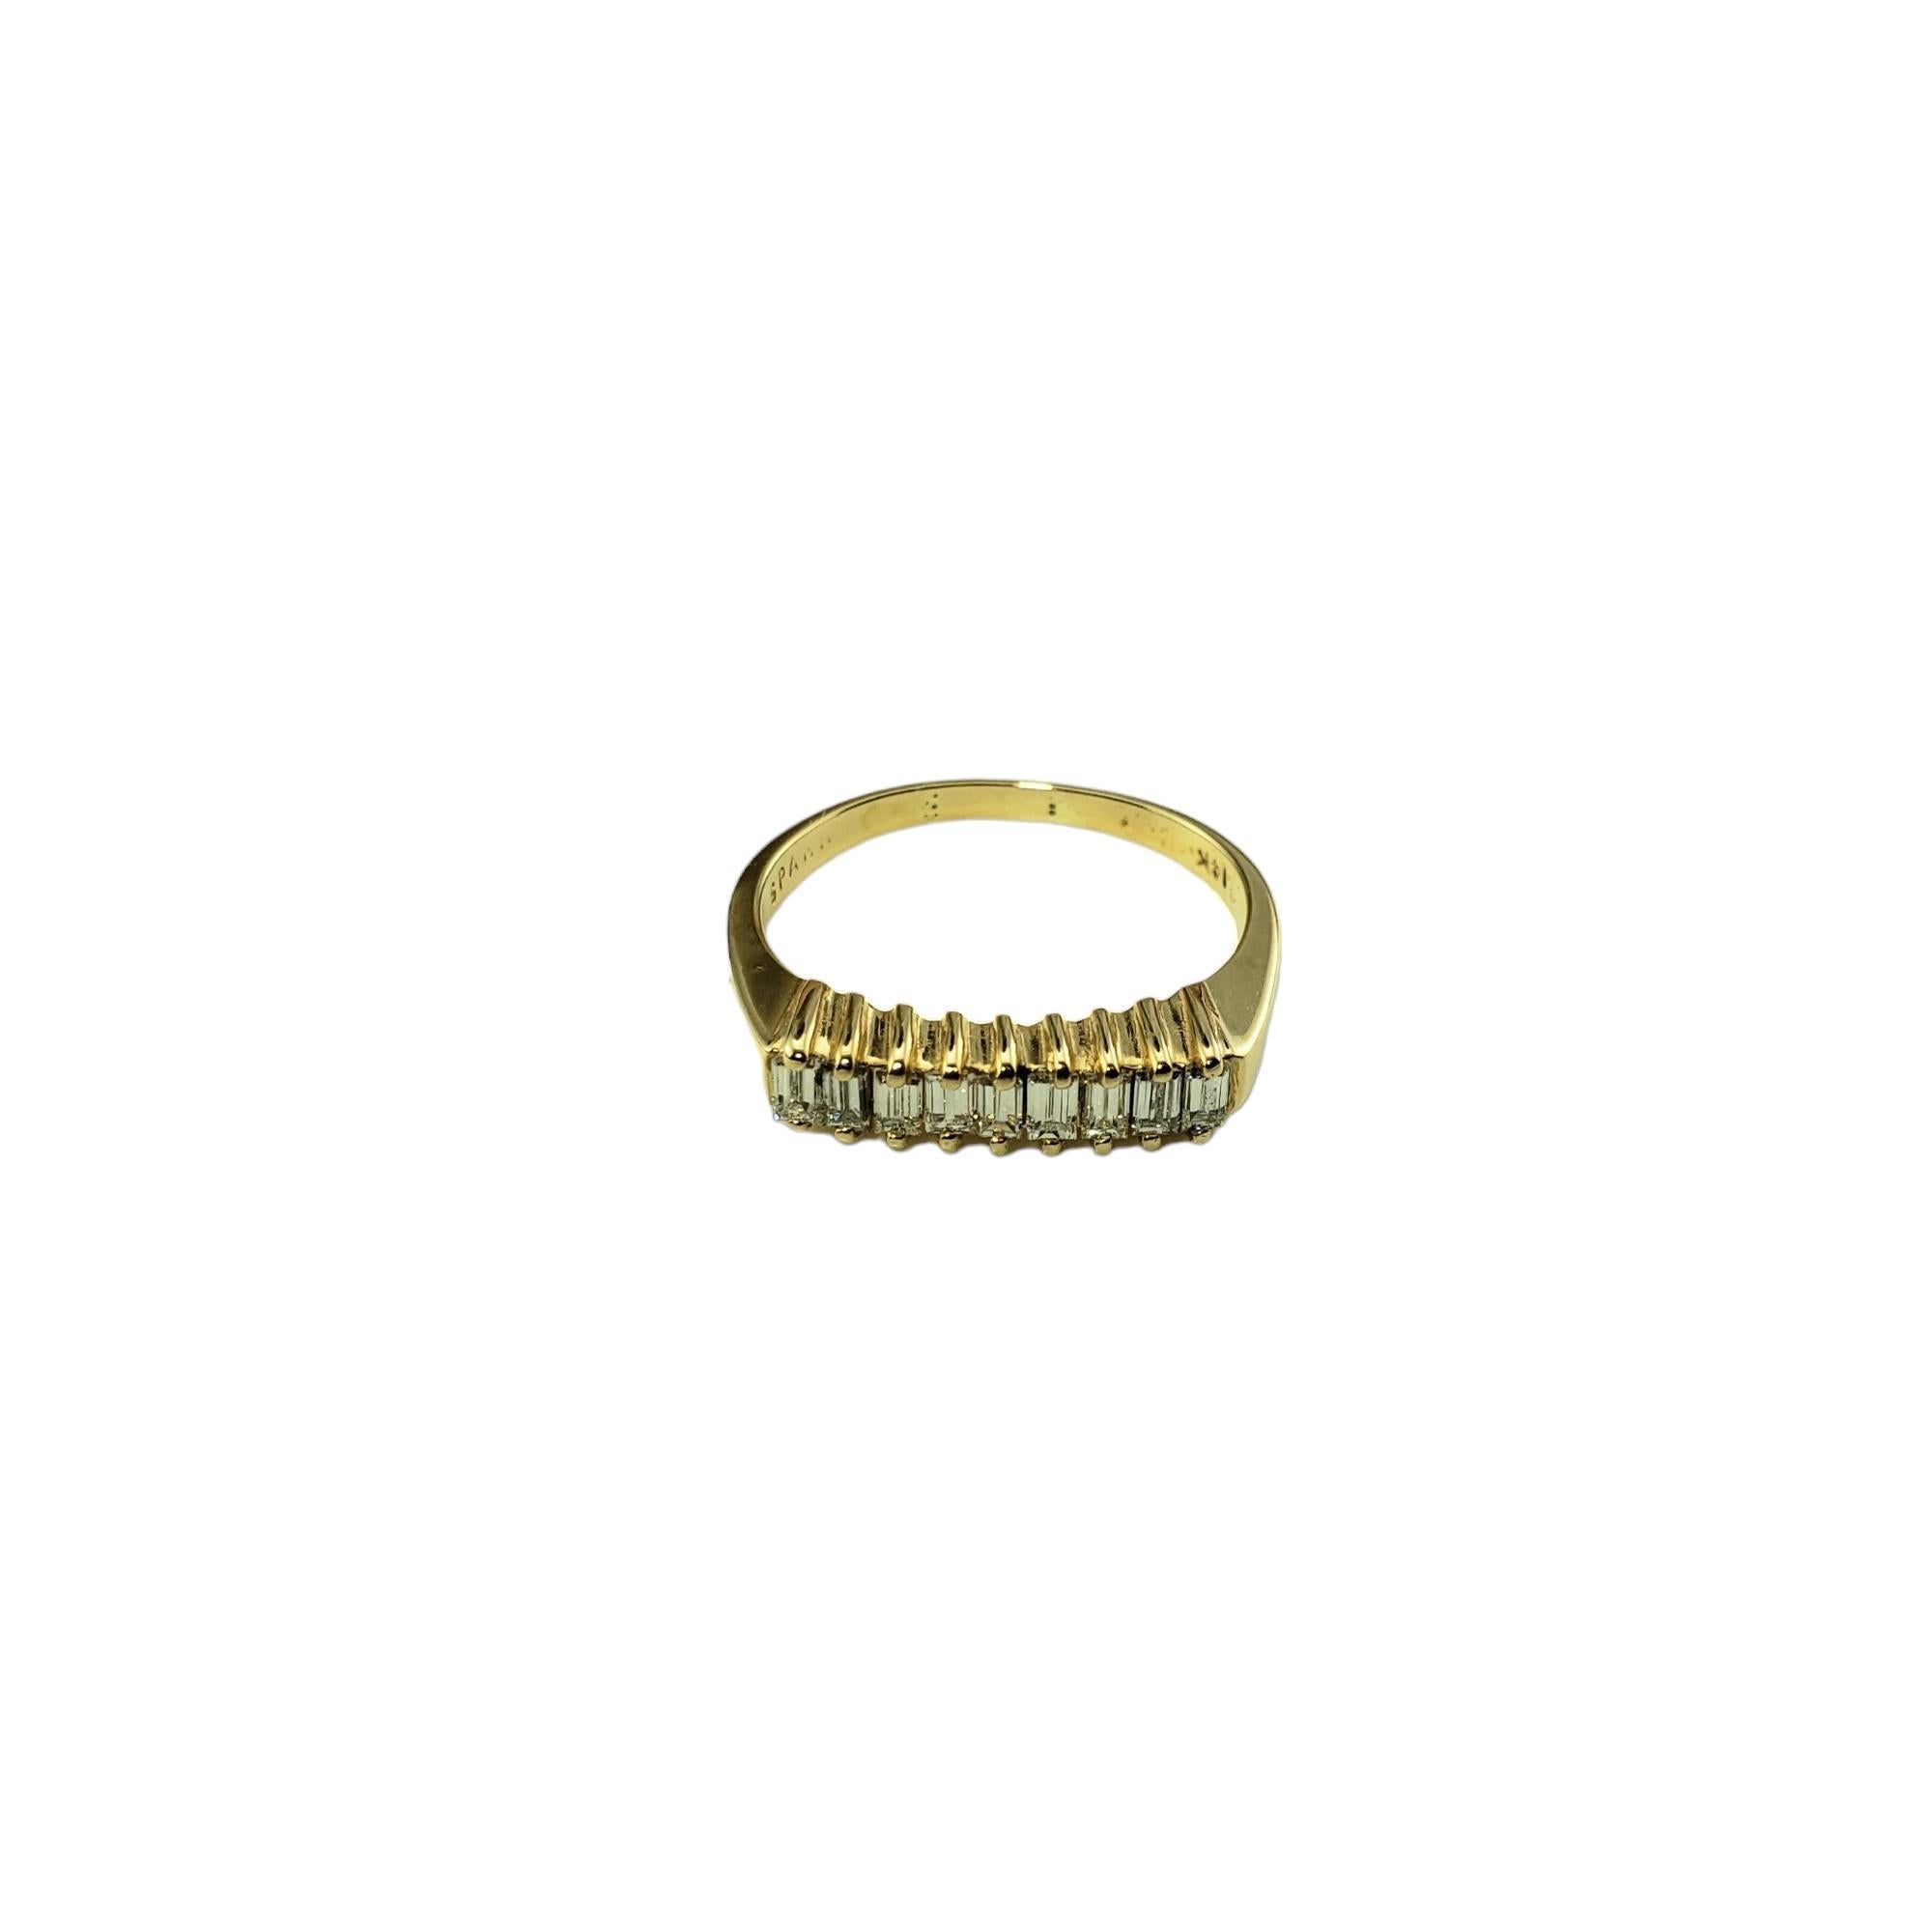 Vintage 14 Karat Yellow Gold and Diamond Ring Size 6.5-

This sparkling ring features nine baguette diamonds set in classic 14K yellow gold.  

Width:  4 mm.  Shank: 1.5 mm.

Approximate total diamond weight:  .20 ct.

Diamond color: G

Diamond